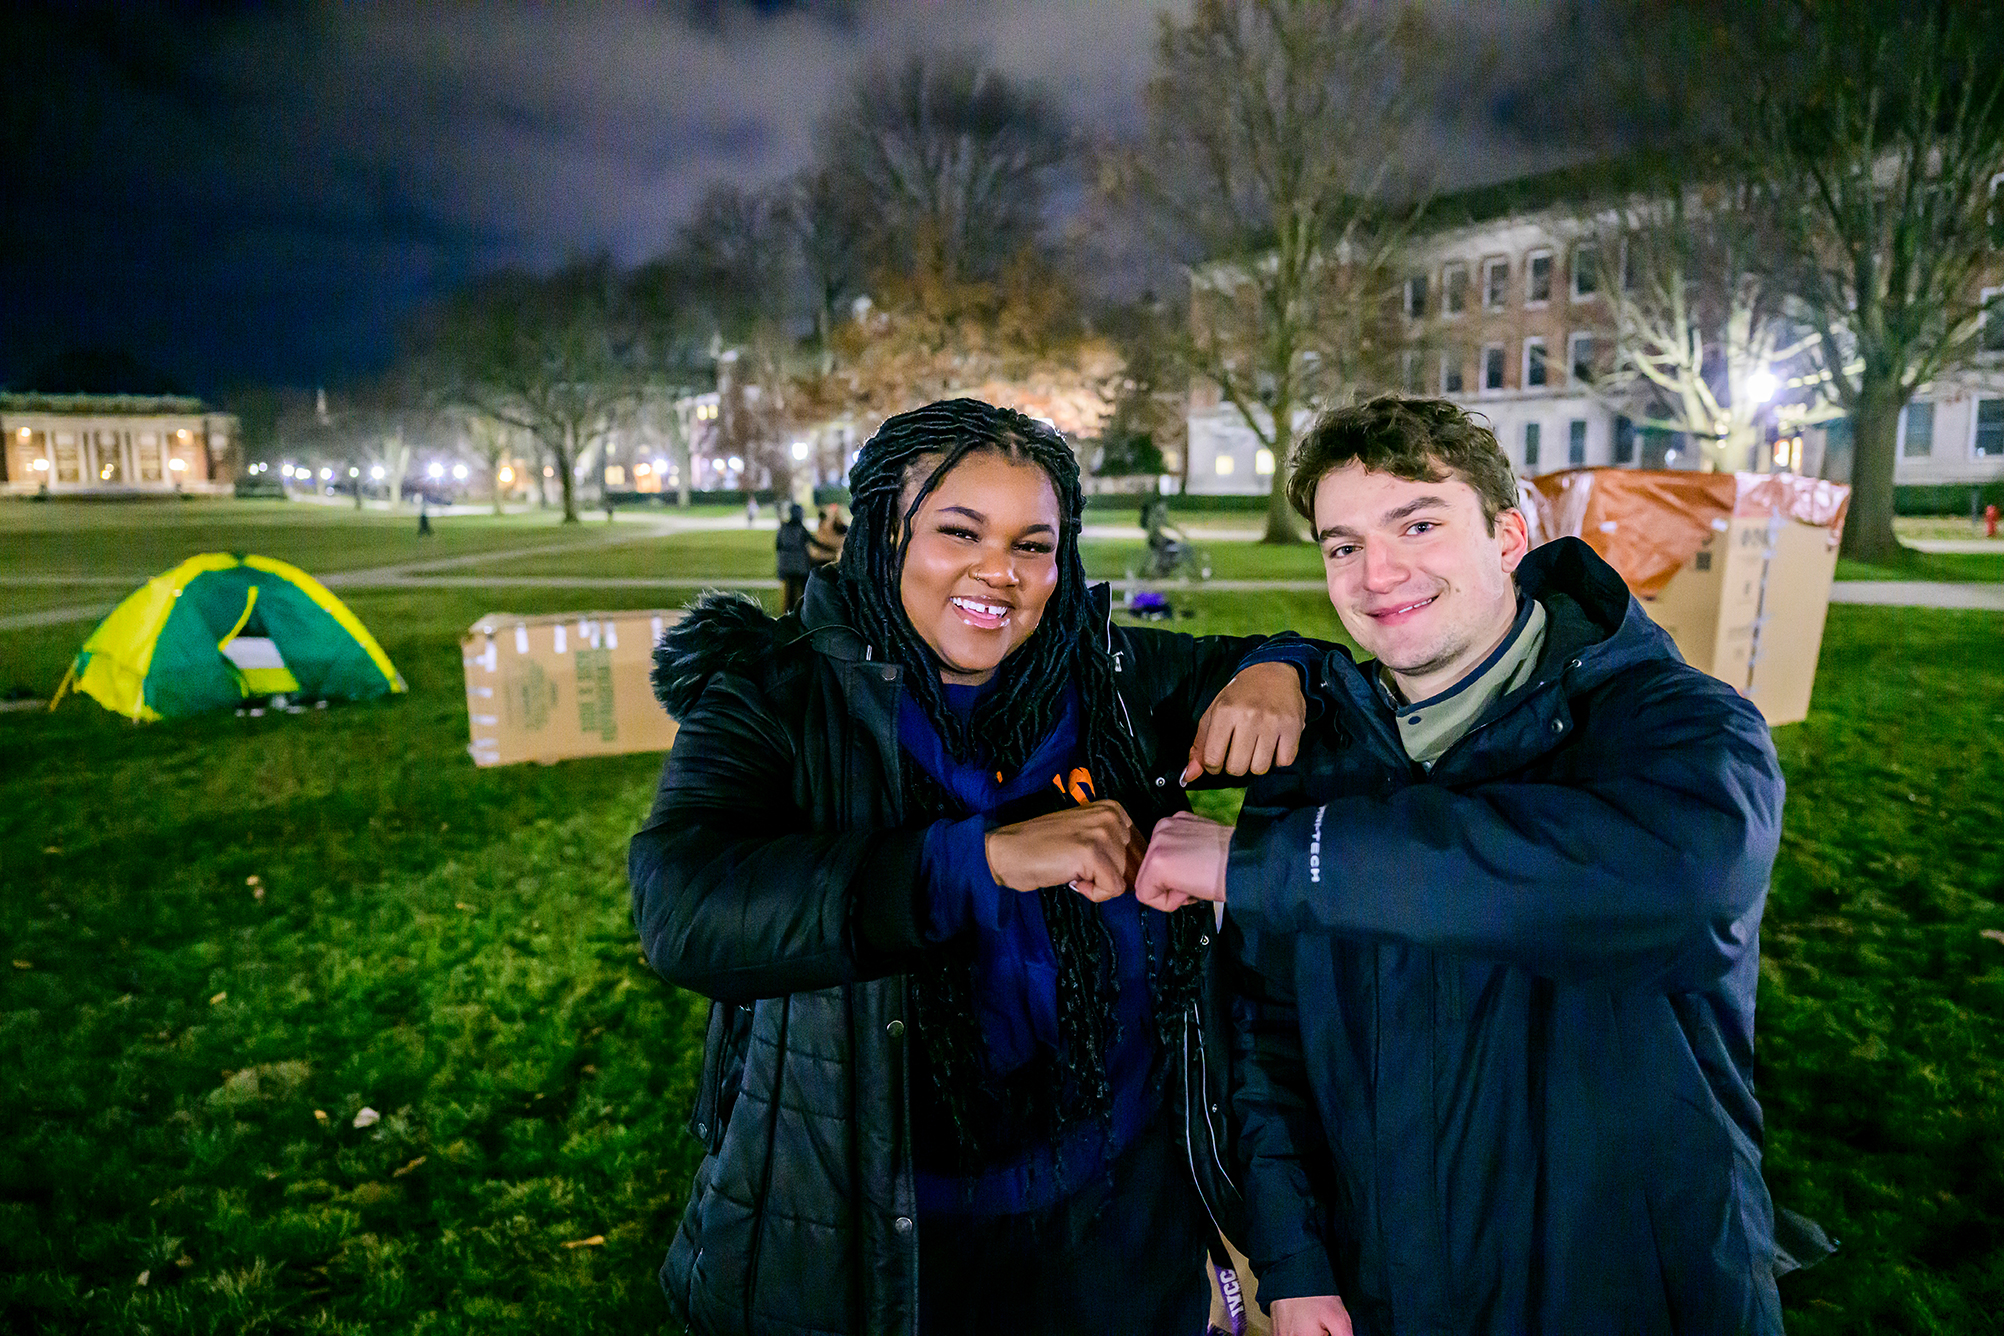 Two students fist bump during One Winter Night event with Main Quad in background